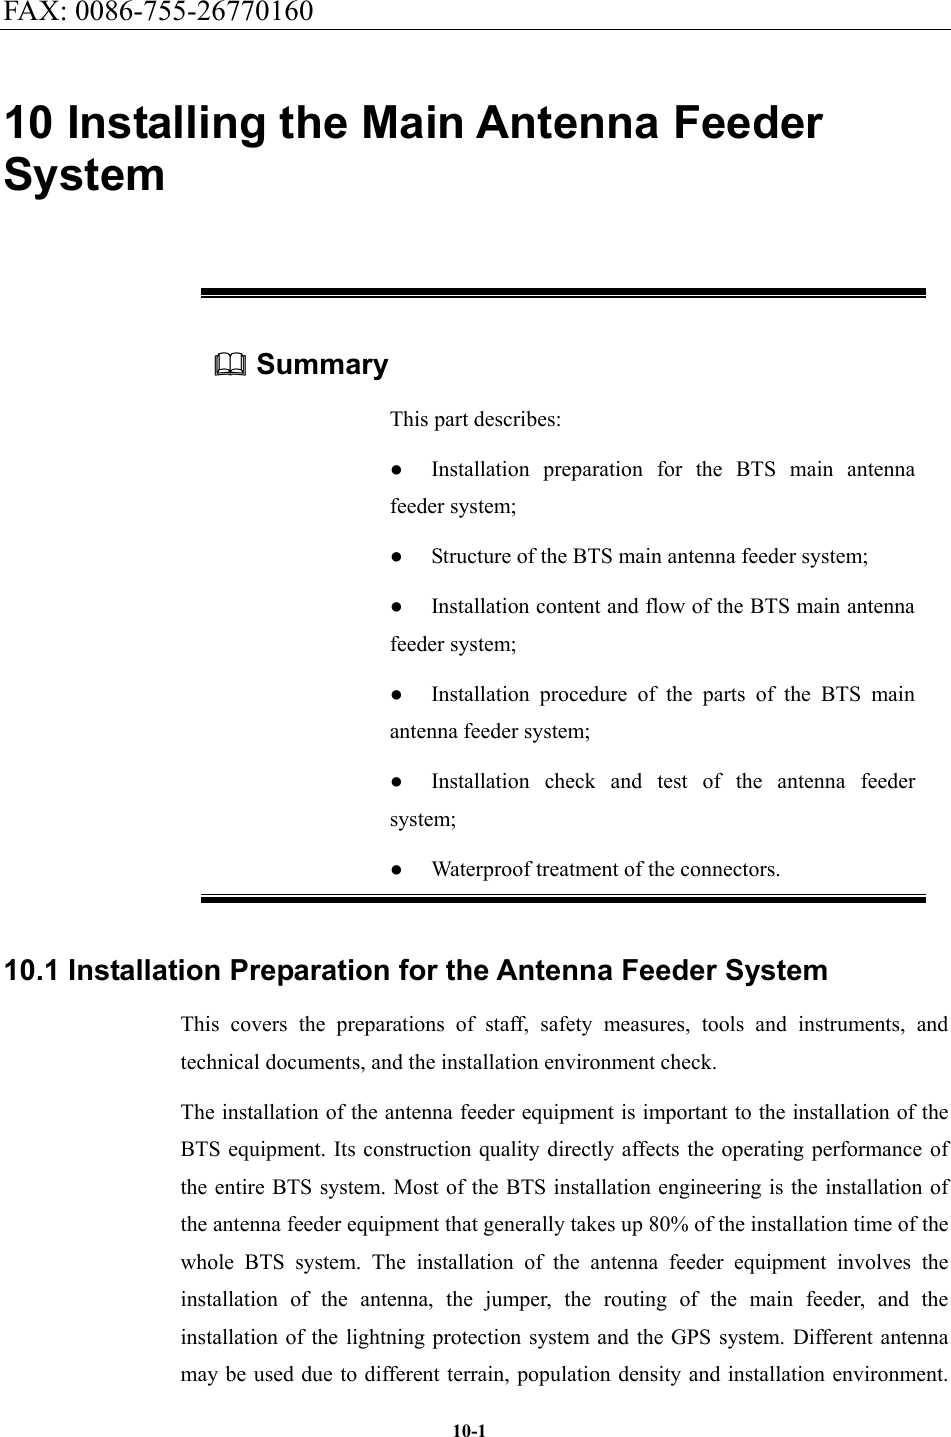 FAX: 0086-755-26770160  10-110 Installing the Main Antenna Feeder System  Summary This part describes: ●  Installation preparation for the BTS main antenna feeder system; ●  Structure of the BTS main antenna feeder system; ●  Installation content and flow of the BTS main antenna feeder system; ●  Installation procedure of the parts of the BTS main antenna feeder system; ●  Installation check and test of the antenna feeder system; ●  Waterproof treatment of the connectors. 10.1 Installation Preparation for the Antenna Feeder System This covers the preparations of staff, safety measures, tools and instruments, and technical documents, and the installation environment check. The installation of the antenna feeder equipment is important to the installation of the BTS equipment. Its construction quality directly affects the operating performance of the entire BTS system. Most of the BTS installation engineering is the installation of the antenna feeder equipment that generally takes up 80% of the installation time of the whole BTS system. The installation of the antenna feeder equipment involves the installation of the antenna, the jumper, the routing of the main feeder, and the installation of the lightning protection system and the GPS system. Different antenna may be used due to different terrain, population density and installation environment. 